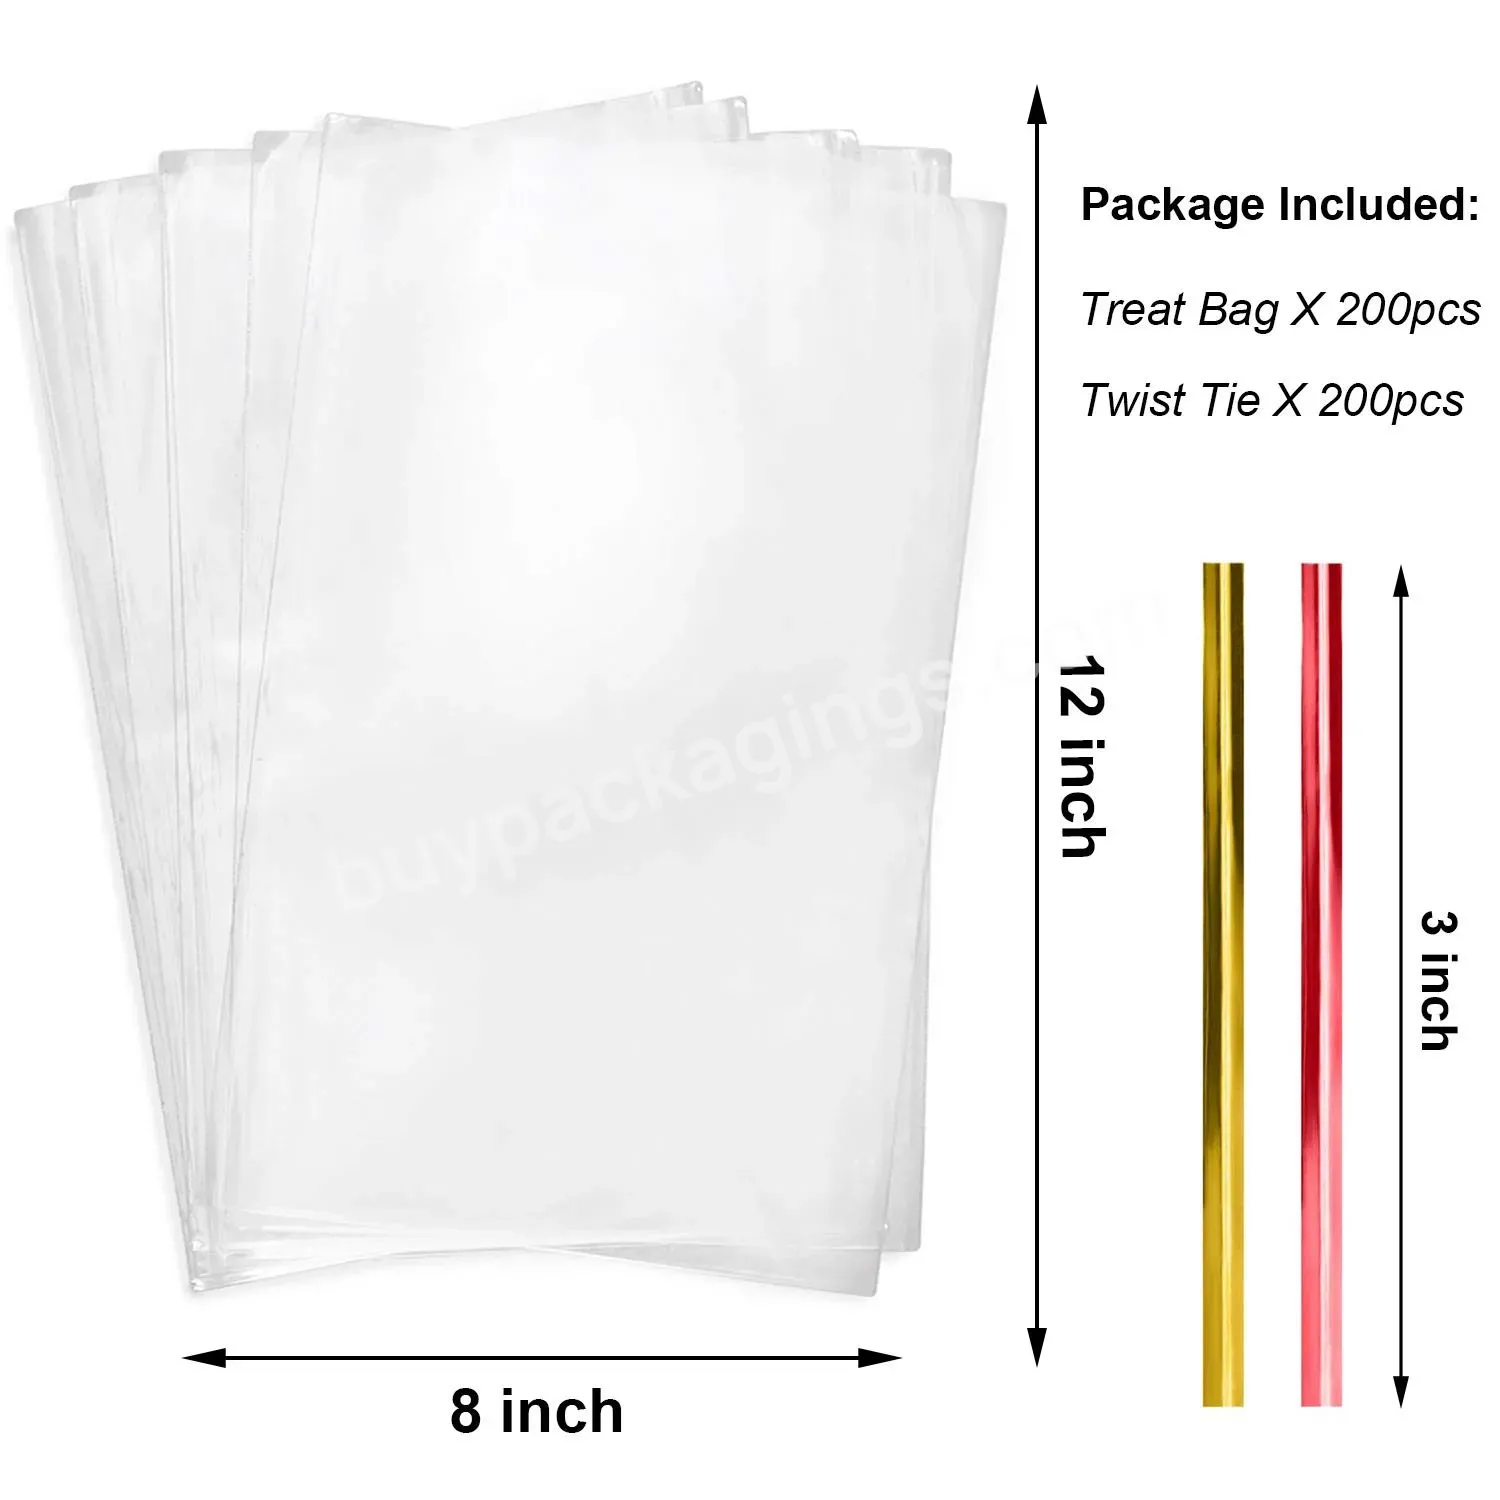 Opp Block Bottom Plastic Packaging Cellophane Bags For Christmas Gift Candy Food Chocolate Biscuits With Card Bottom